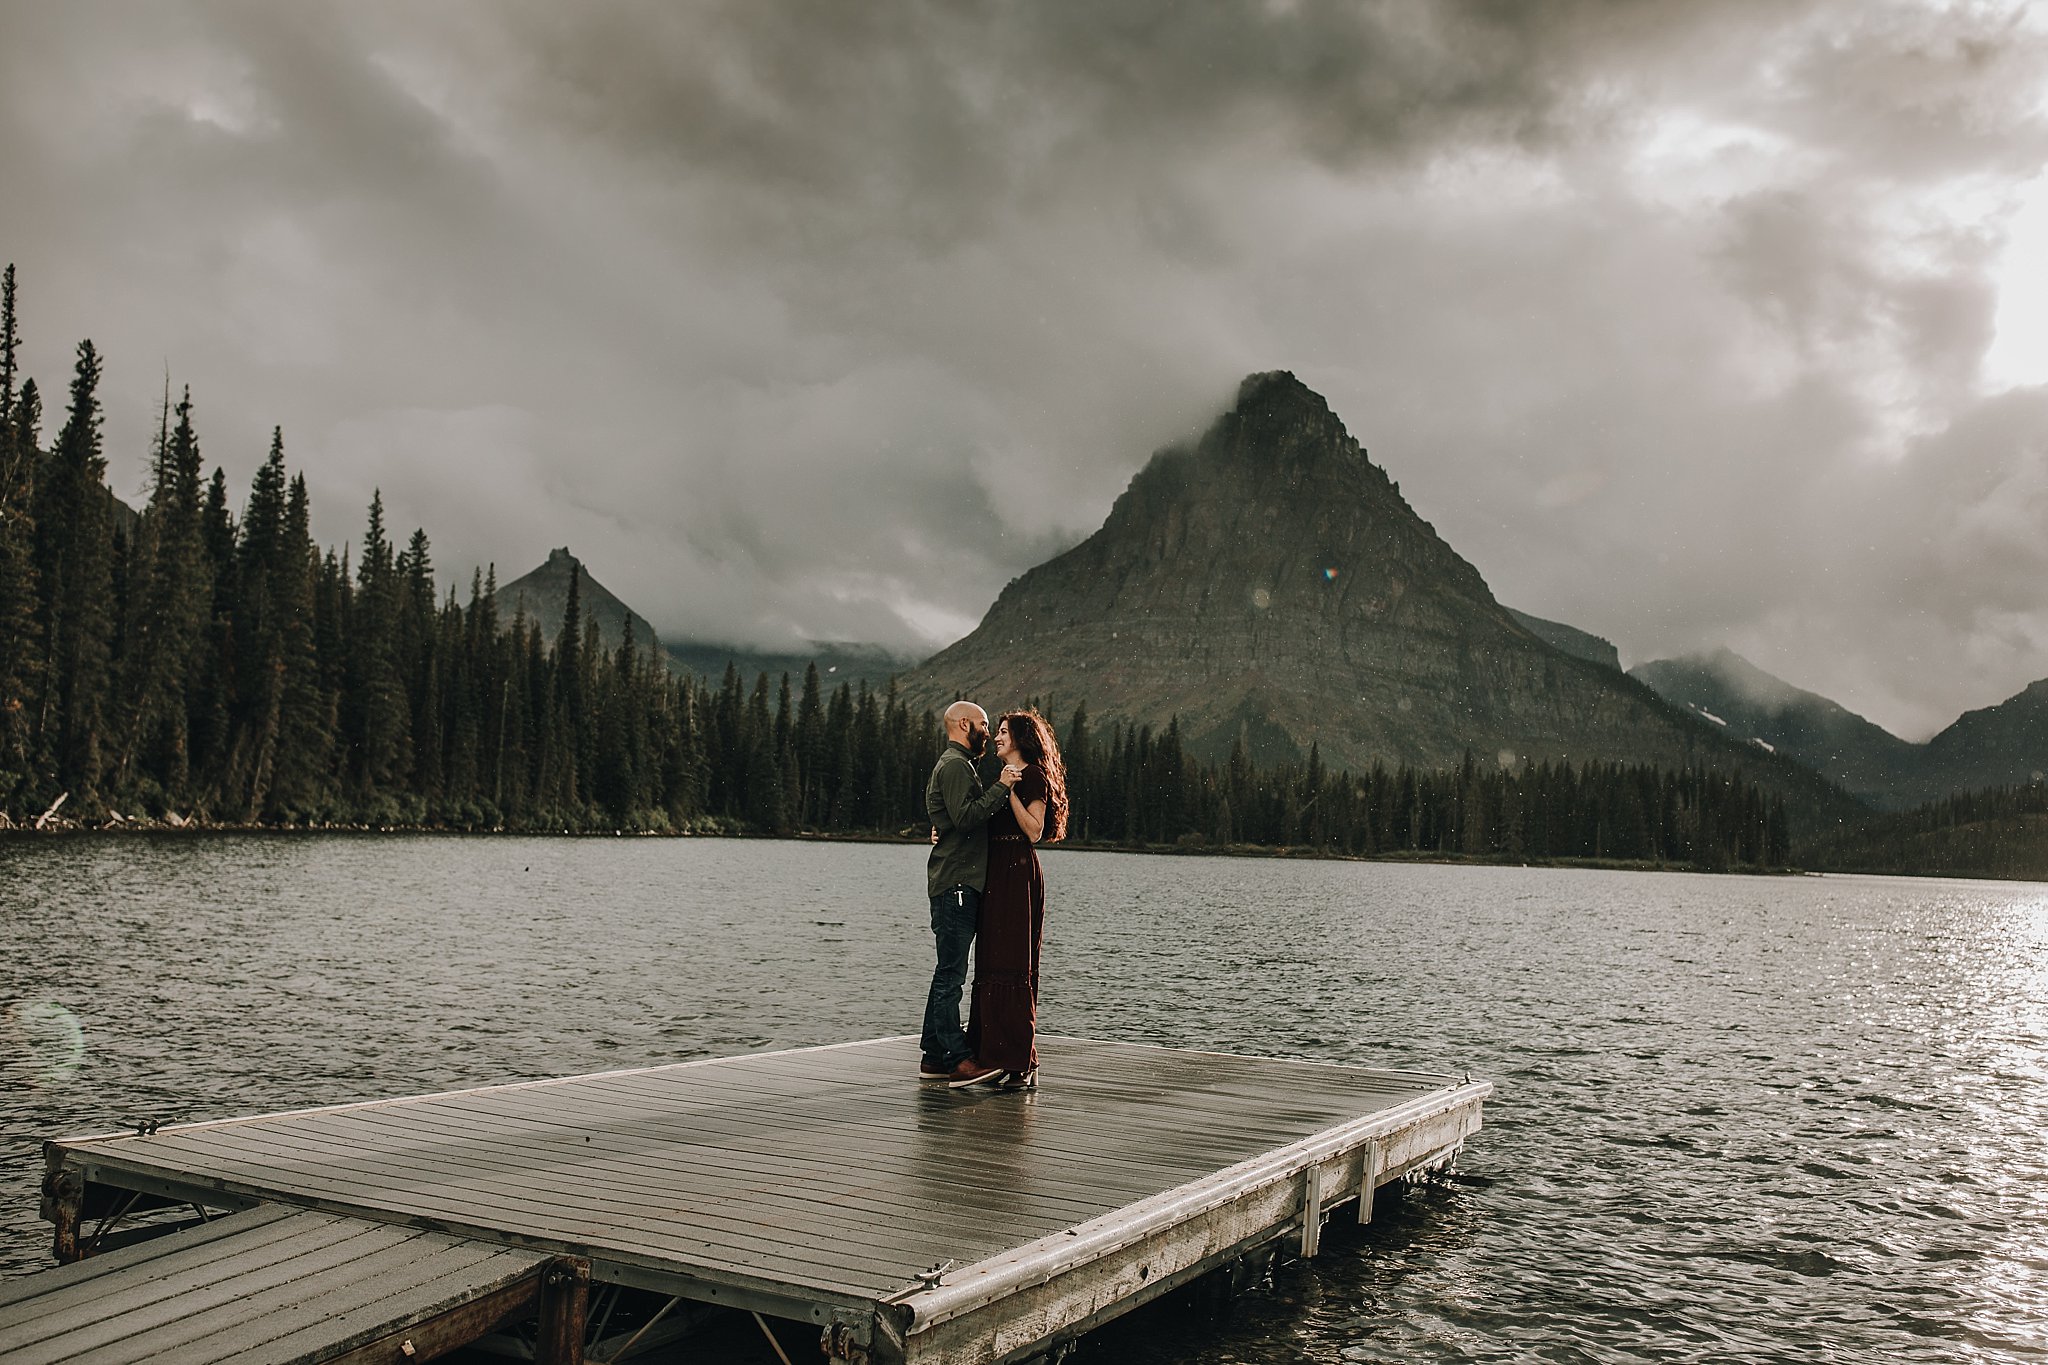 Couple Dancing in the rain on a dock